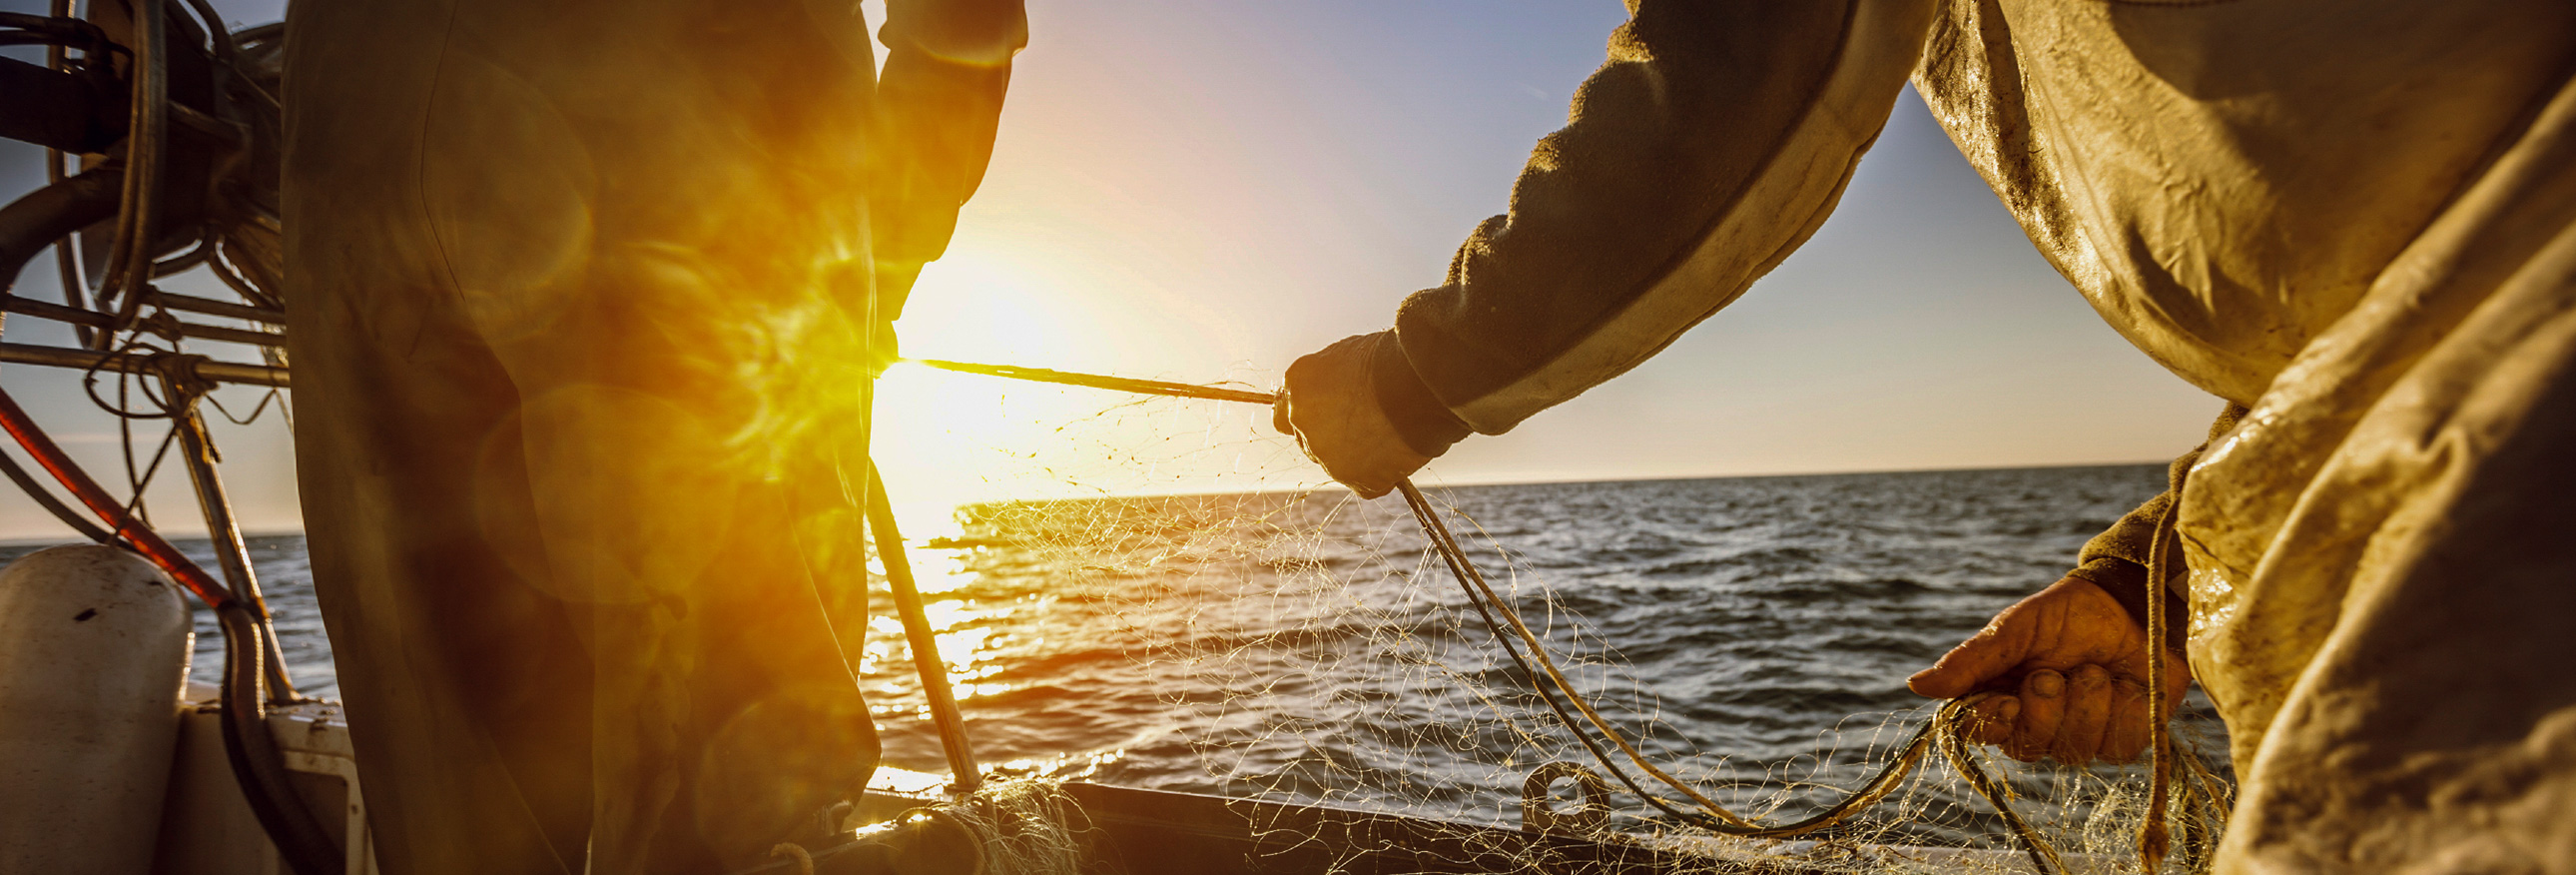 fisherman tying nets on board a boat with sun in background